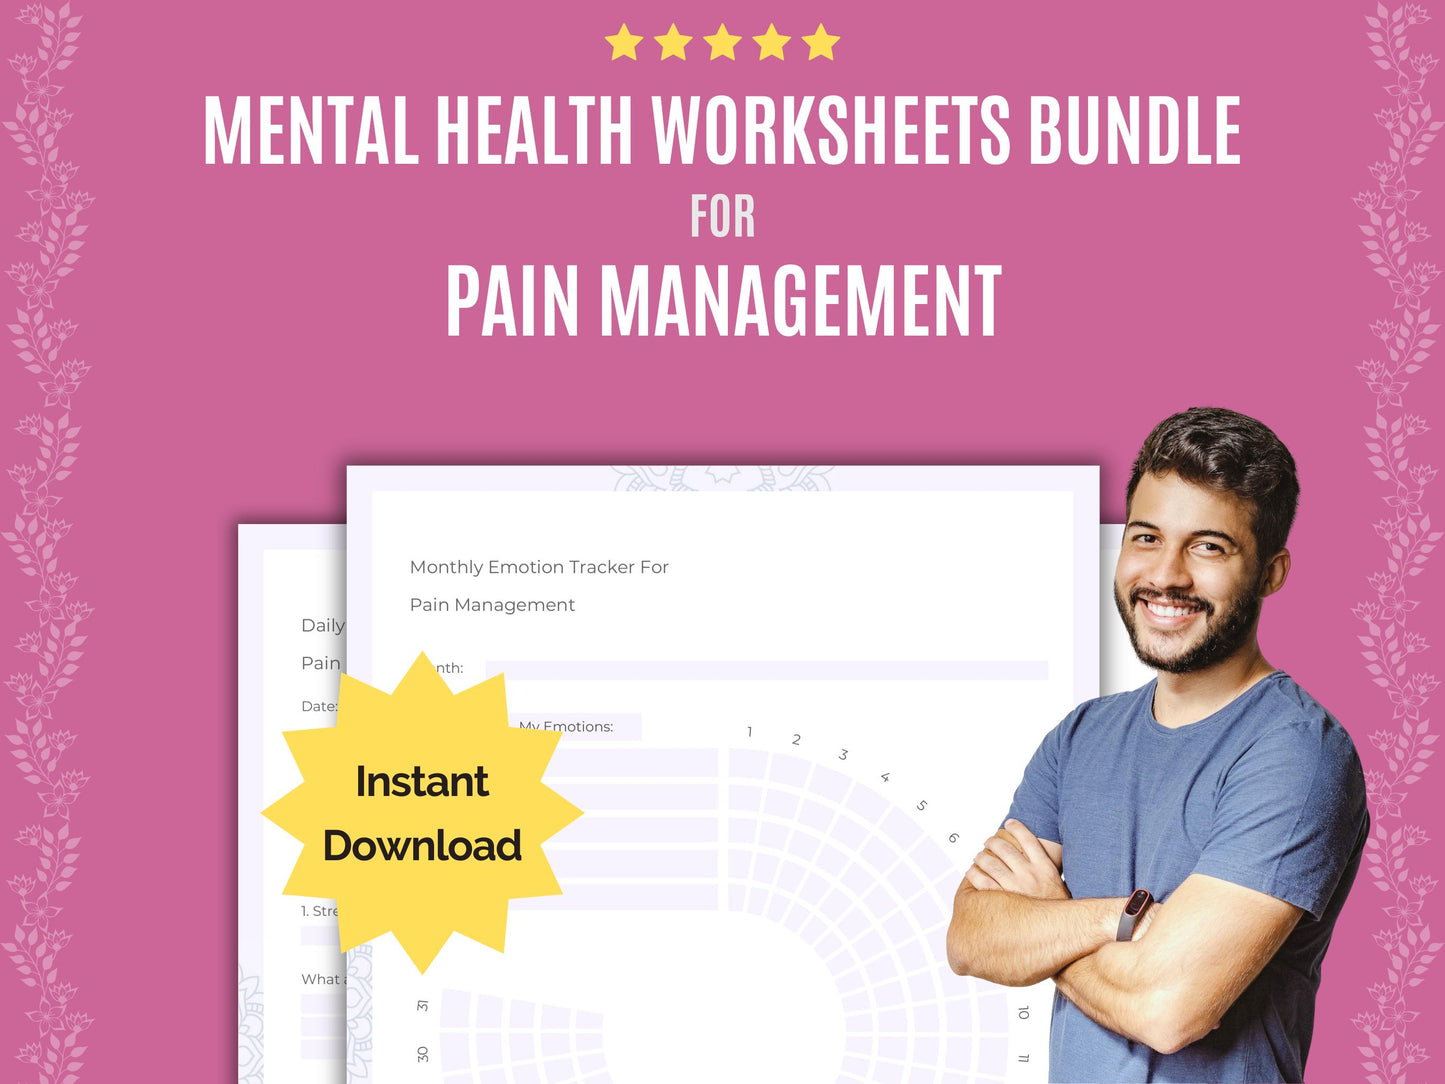 Pain Therapy, Pain Tools, Pain Templates, Pain Journaling, Pain Mental Health, Pain Counseling, Management, Pain Workbooks, Pain Planners, Pain Notes, Pain Journals, Pain Resources, Pain Cheat Sheet, Pain Goal Setting